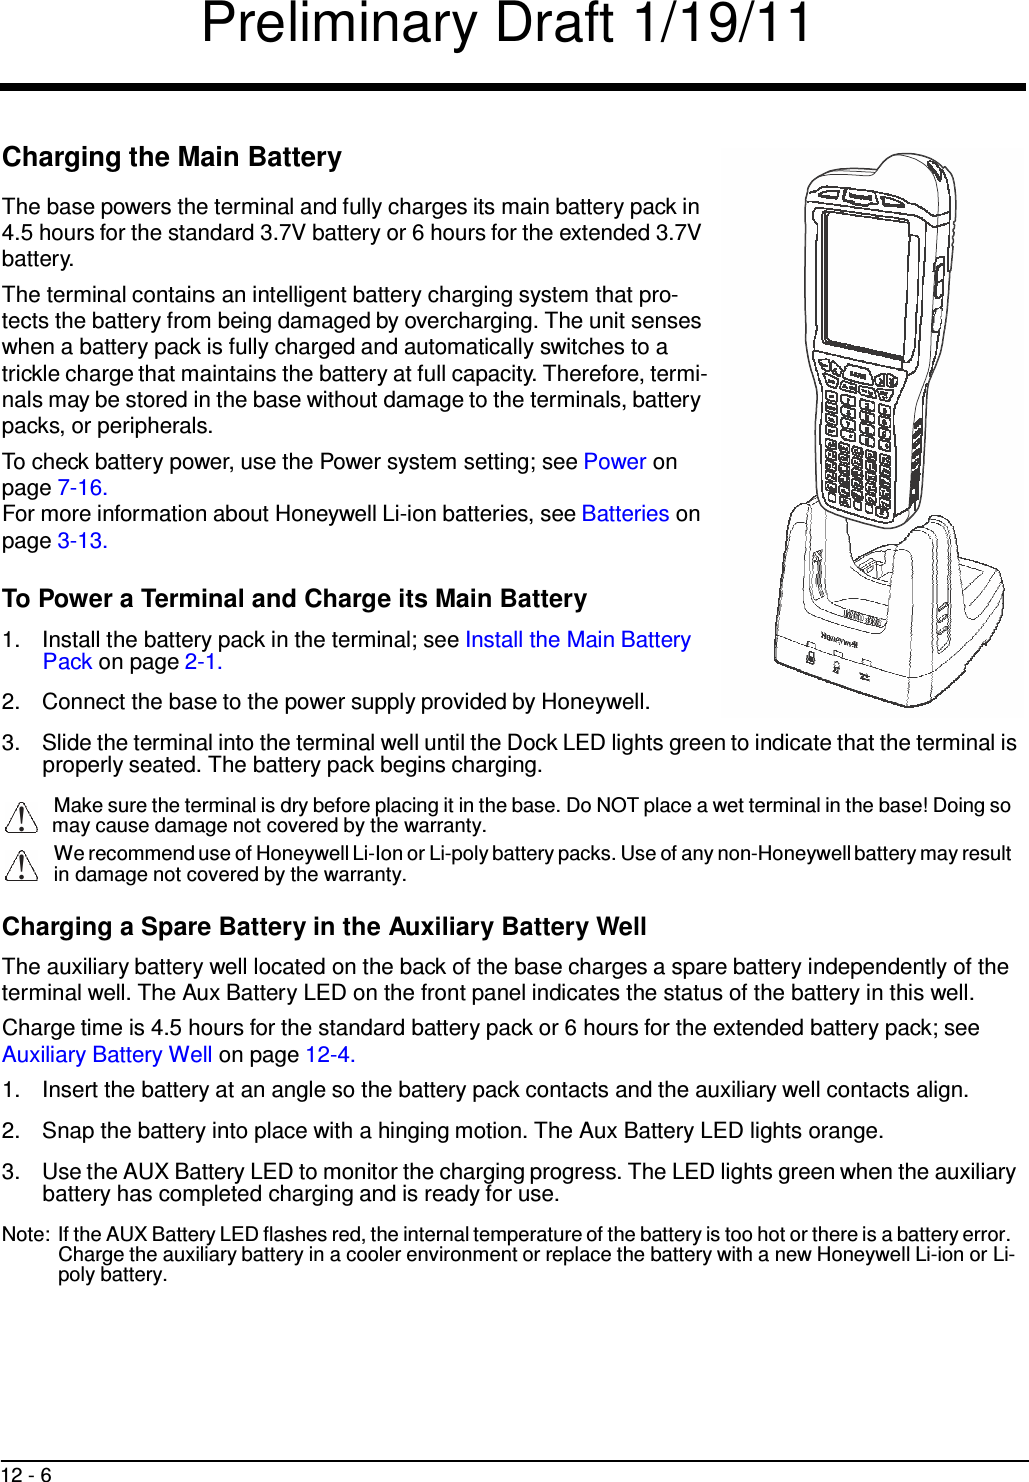 Preliminary Draft 1/19/11 12 - 6      !   Charging the Main Battery  The base powers the terminal and fully charges its main battery pack in 4.5 hours for the standard 3.7V battery or 6 hours for the extended 3.7V battery. The terminal contains an intelligent battery charging system that pro- tects the battery from being damaged by overcharging. The unit senses when a battery pack is fully charged and automatically switches to a trickle charge that maintains the battery at full capacity. Therefore, termi- nals may be stored in the base without damage to the terminals, battery packs, or peripherals. To check battery power, use the Power system setting; see Power on page 7-16. For more information about Honeywell Li-ion batteries, see Batteries on page 3-13.  To Power a Terminal and Charge its Main Battery  1.  Install the battery pack in the terminal; see Install the Main Battery Pack on page 2-1.  2.  Connect the base to the power supply provided by Honeywell.  3.  Slide the terminal into the terminal well until the Dock LED lights green to indicate that the terminal is properly seated. The battery pack begins charging.  Make sure the terminal is dry before placing it in the base. Do NOT place a wet terminal in the base! Doing so !   may cause damage not covered by the warranty. We recommend use of Honeywell Li-Ion or Li-poly battery packs. Use of any non-Honeywell battery may result in damage not covered by the warranty.  Charging a Spare Battery in the Auxiliary Battery Well  The auxiliary battery well located on the back of the base charges a spare battery independently of the terminal well. The Aux Battery LED on the front panel indicates the status of the battery in this well. Charge time is 4.5 hours for the standard battery pack or 6 hours for the extended battery pack; see Auxiliary Battery Well on page 12-4. 1.  Insert the battery at an angle so the battery pack contacts and the auxiliary well contacts align.  2.  Snap the battery into place with a hinging motion. The Aux Battery LED lights orange.  3.  Use the AUX Battery LED to monitor the charging progress. The LED lights green when the auxiliary battery has completed charging and is ready for use.  Note: If the AUX Battery LED flashes red, the internal temperature of the battery is too hot or there is a battery error. Charge the auxiliary battery in a cooler environment or replace the battery with a new Honeywell Li-ion or Li- poly battery. 